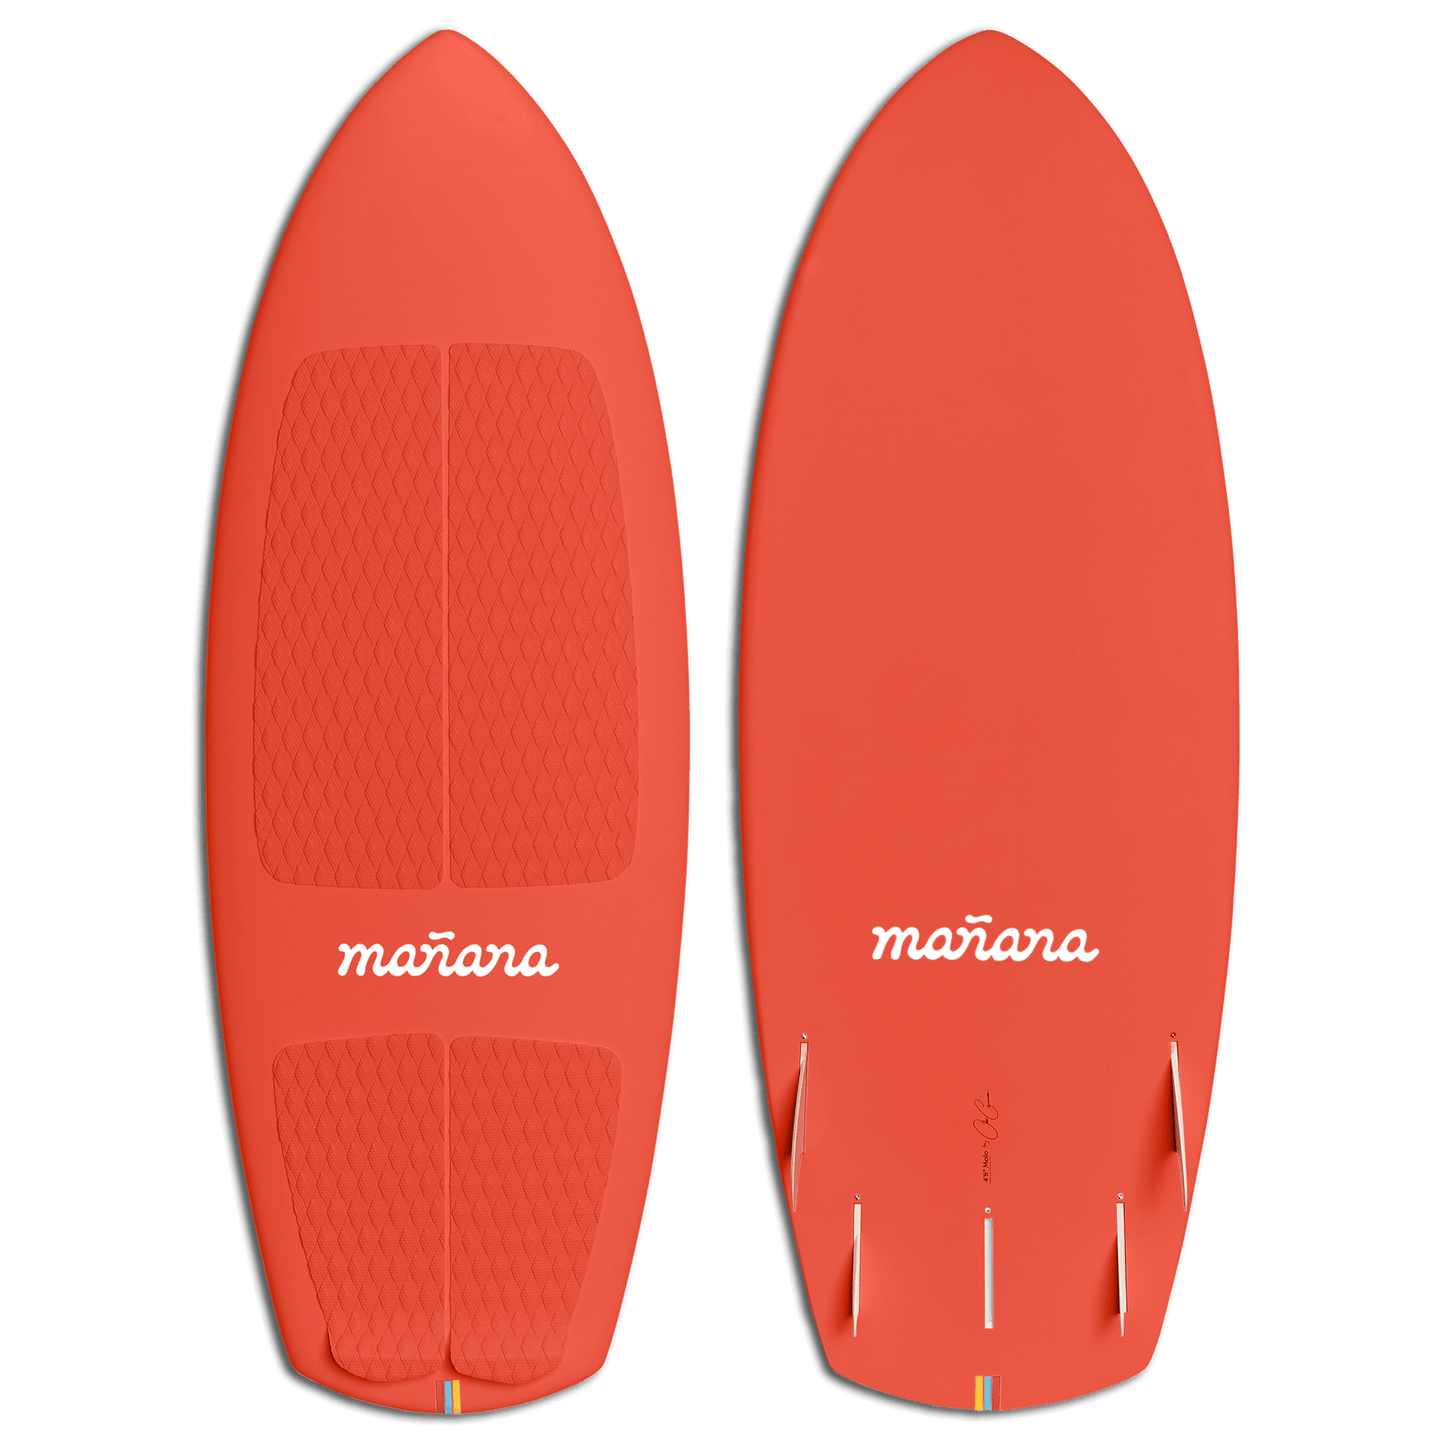 Molo with Manana branding - Red